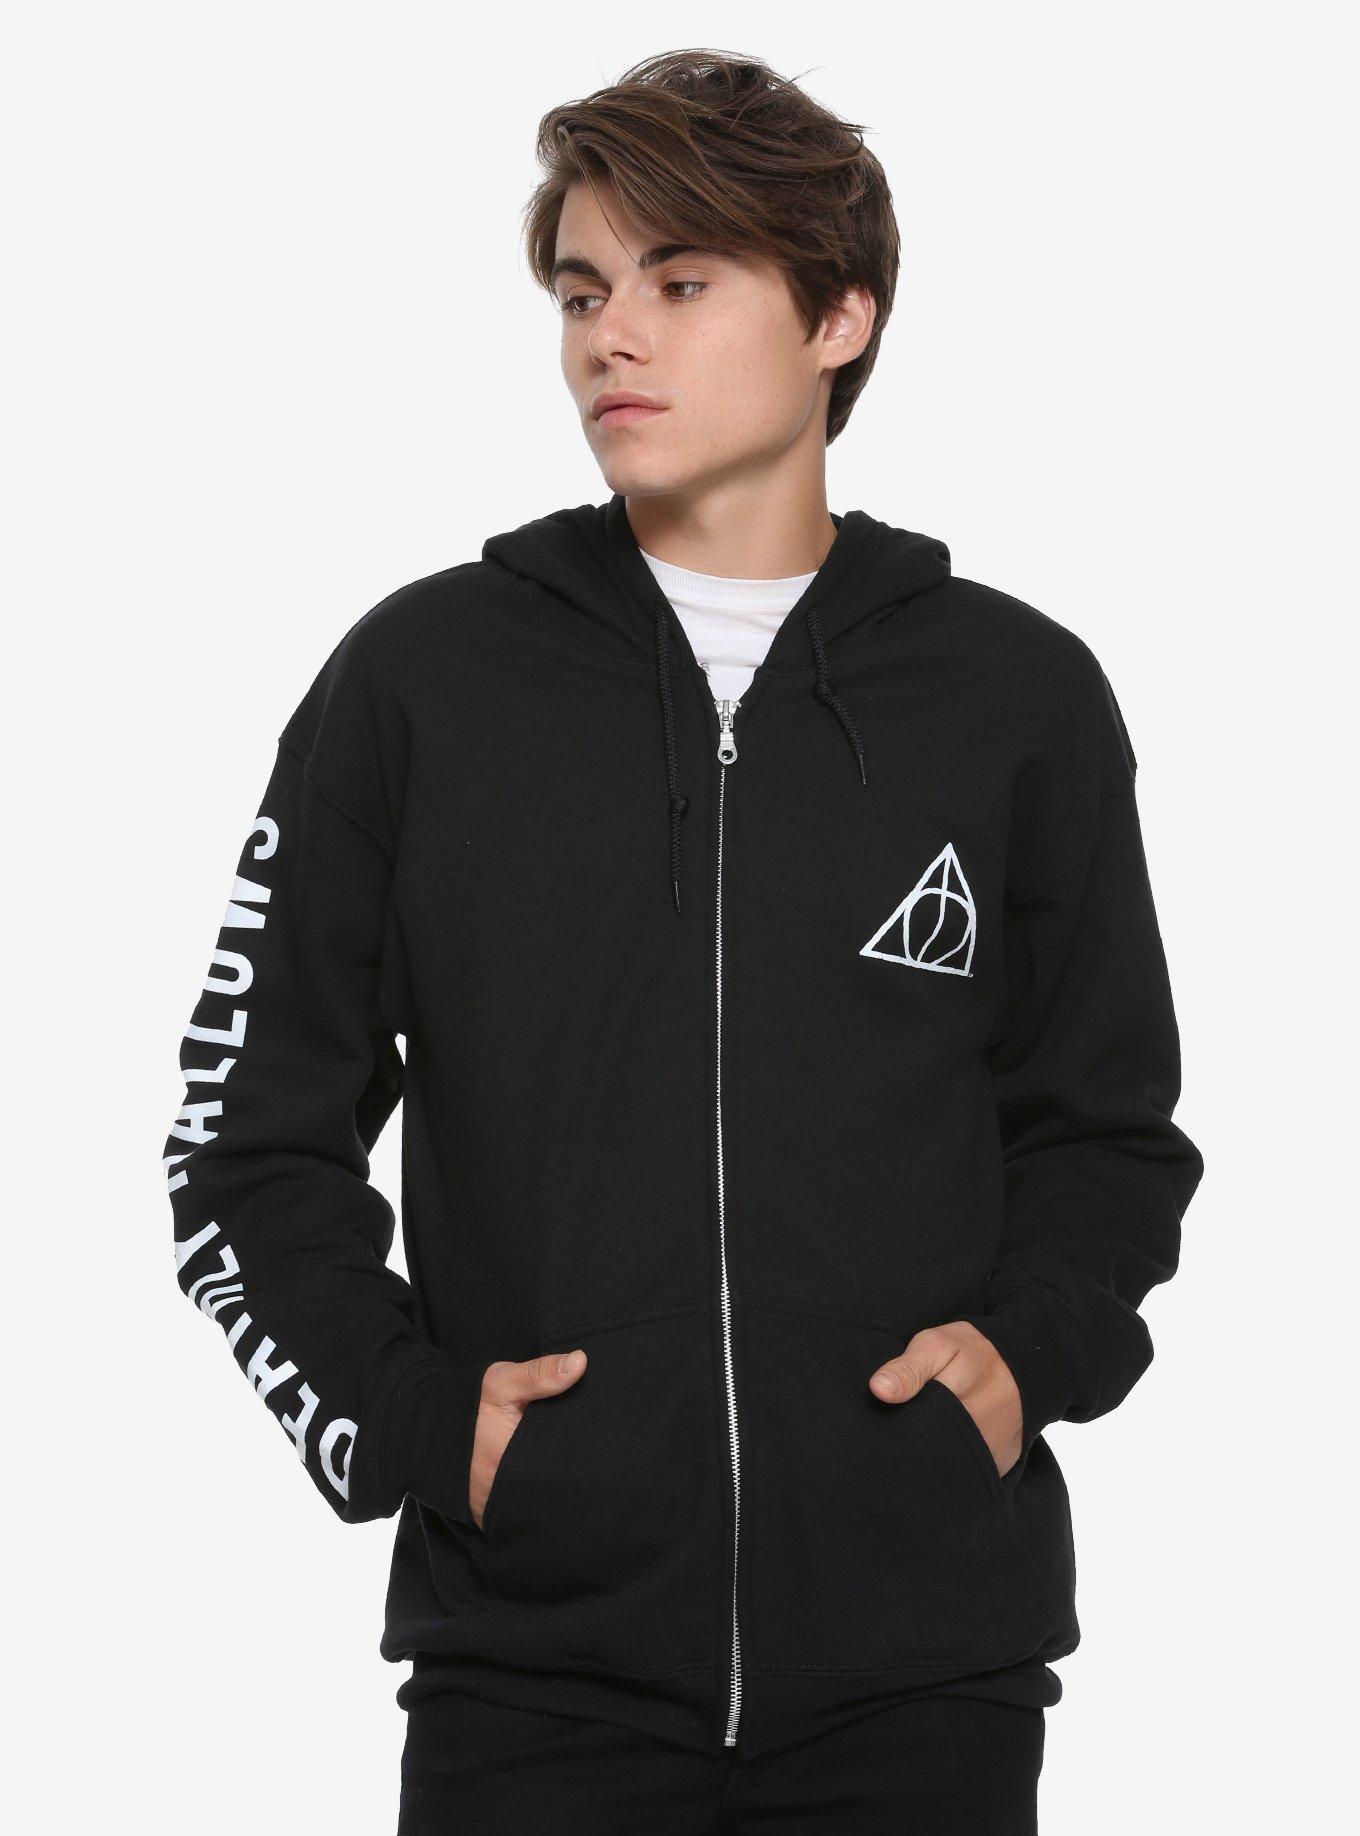 Harry Potter Deathly Hallows Hoodie | Hot Topic